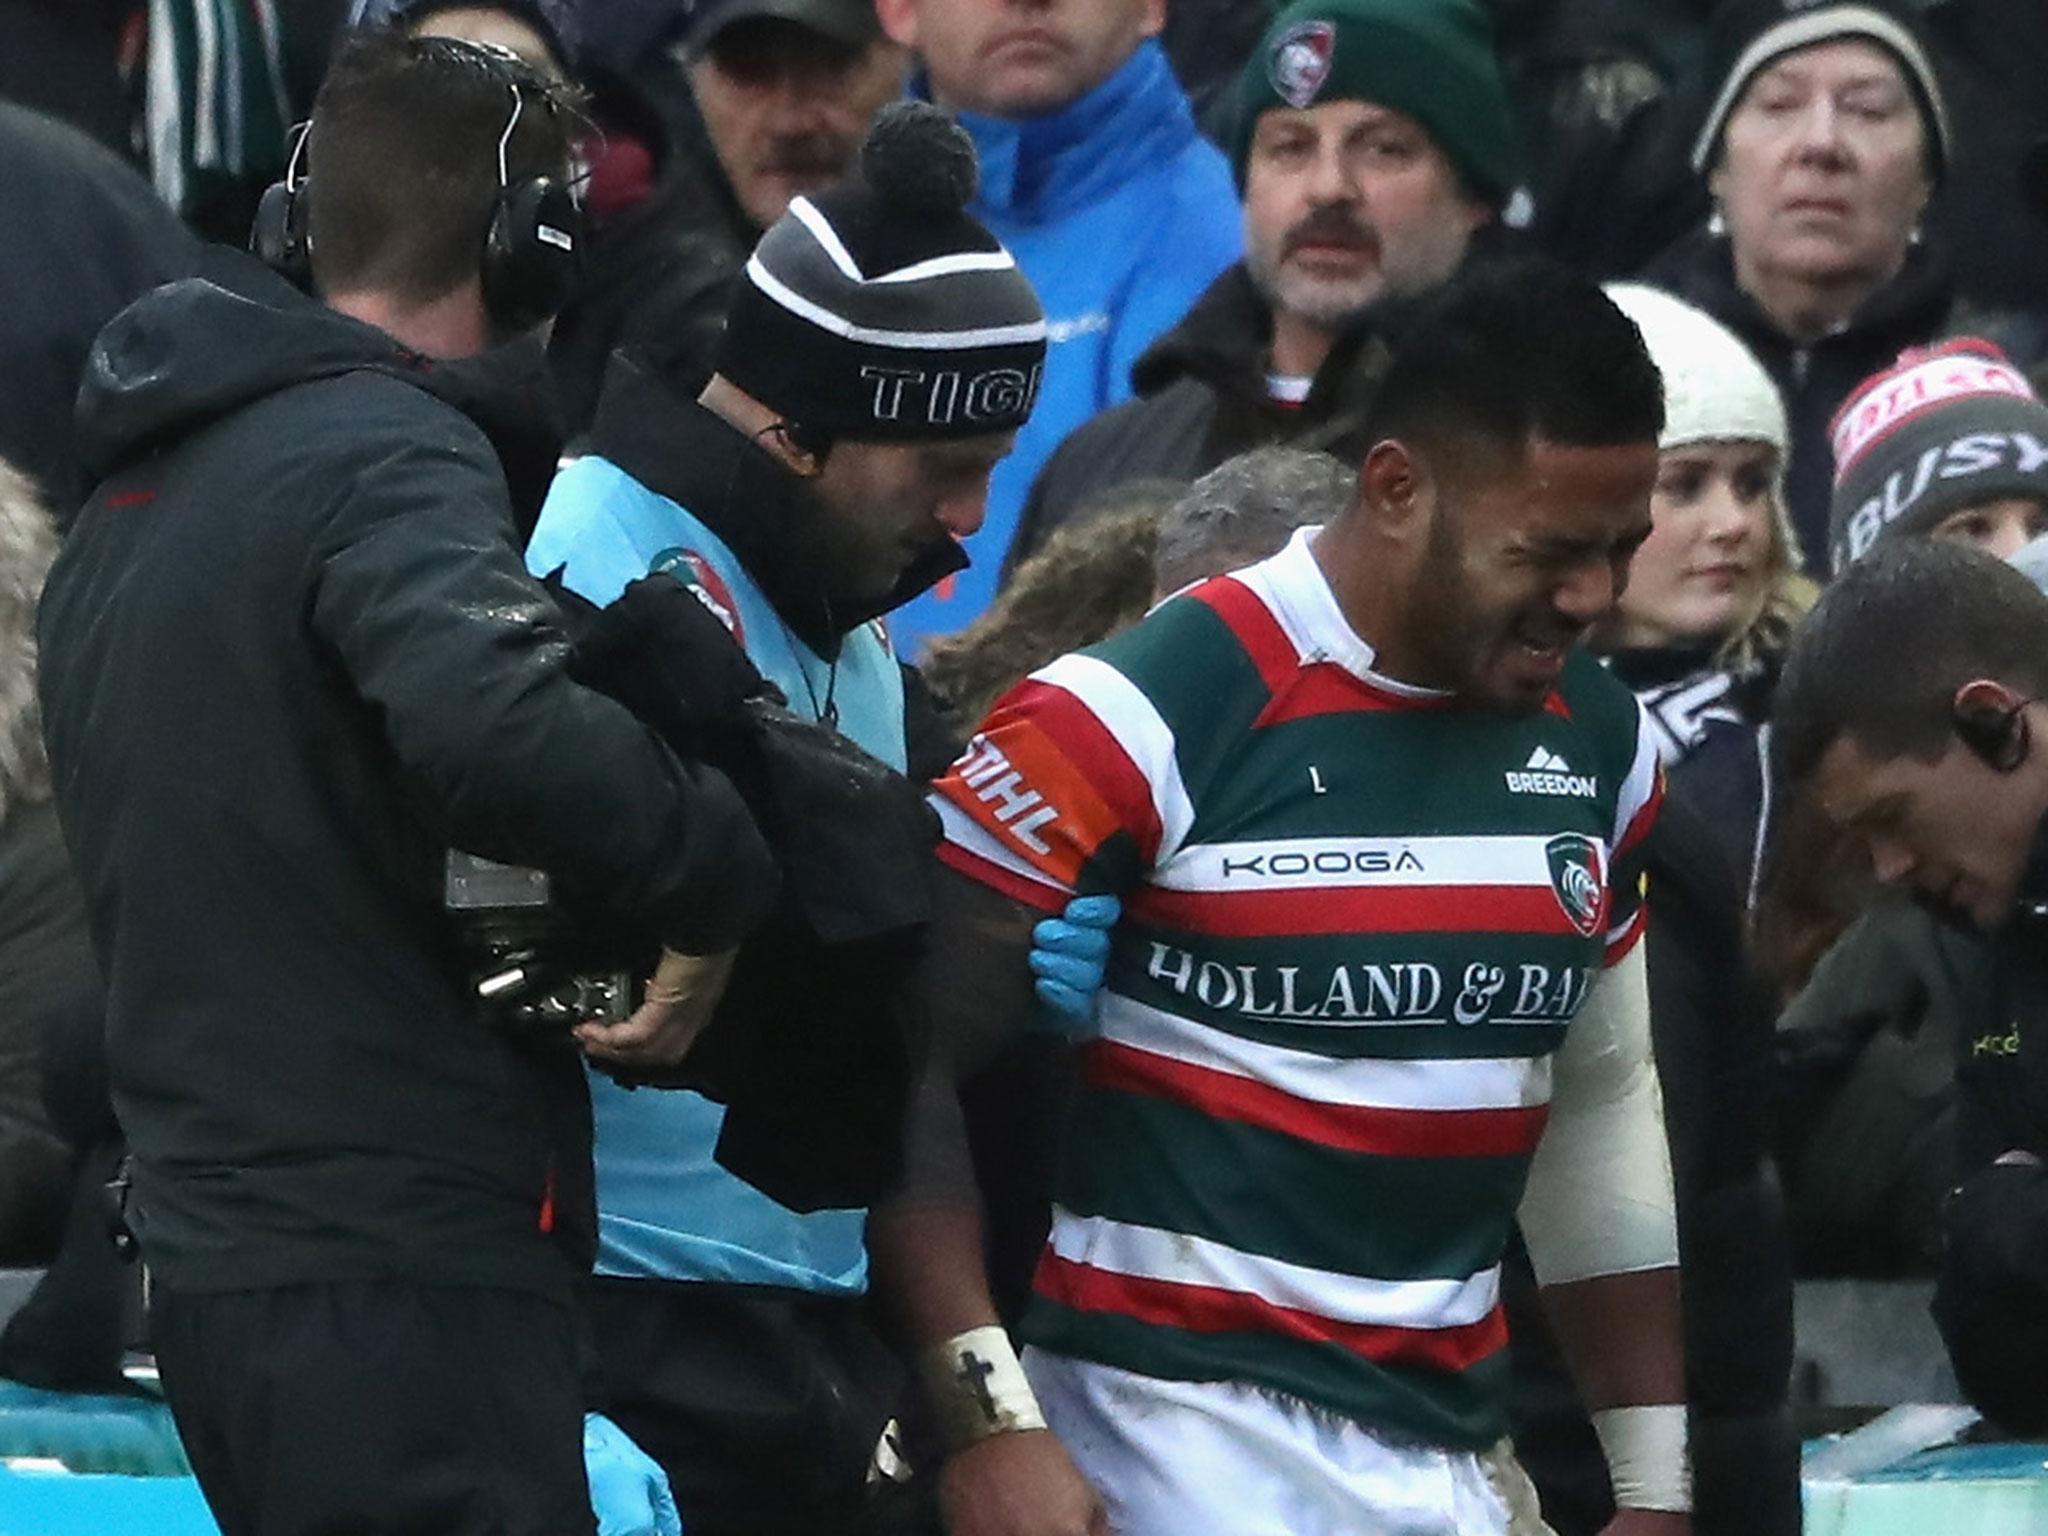 Tuilagi managed just one appearance for England in 2016